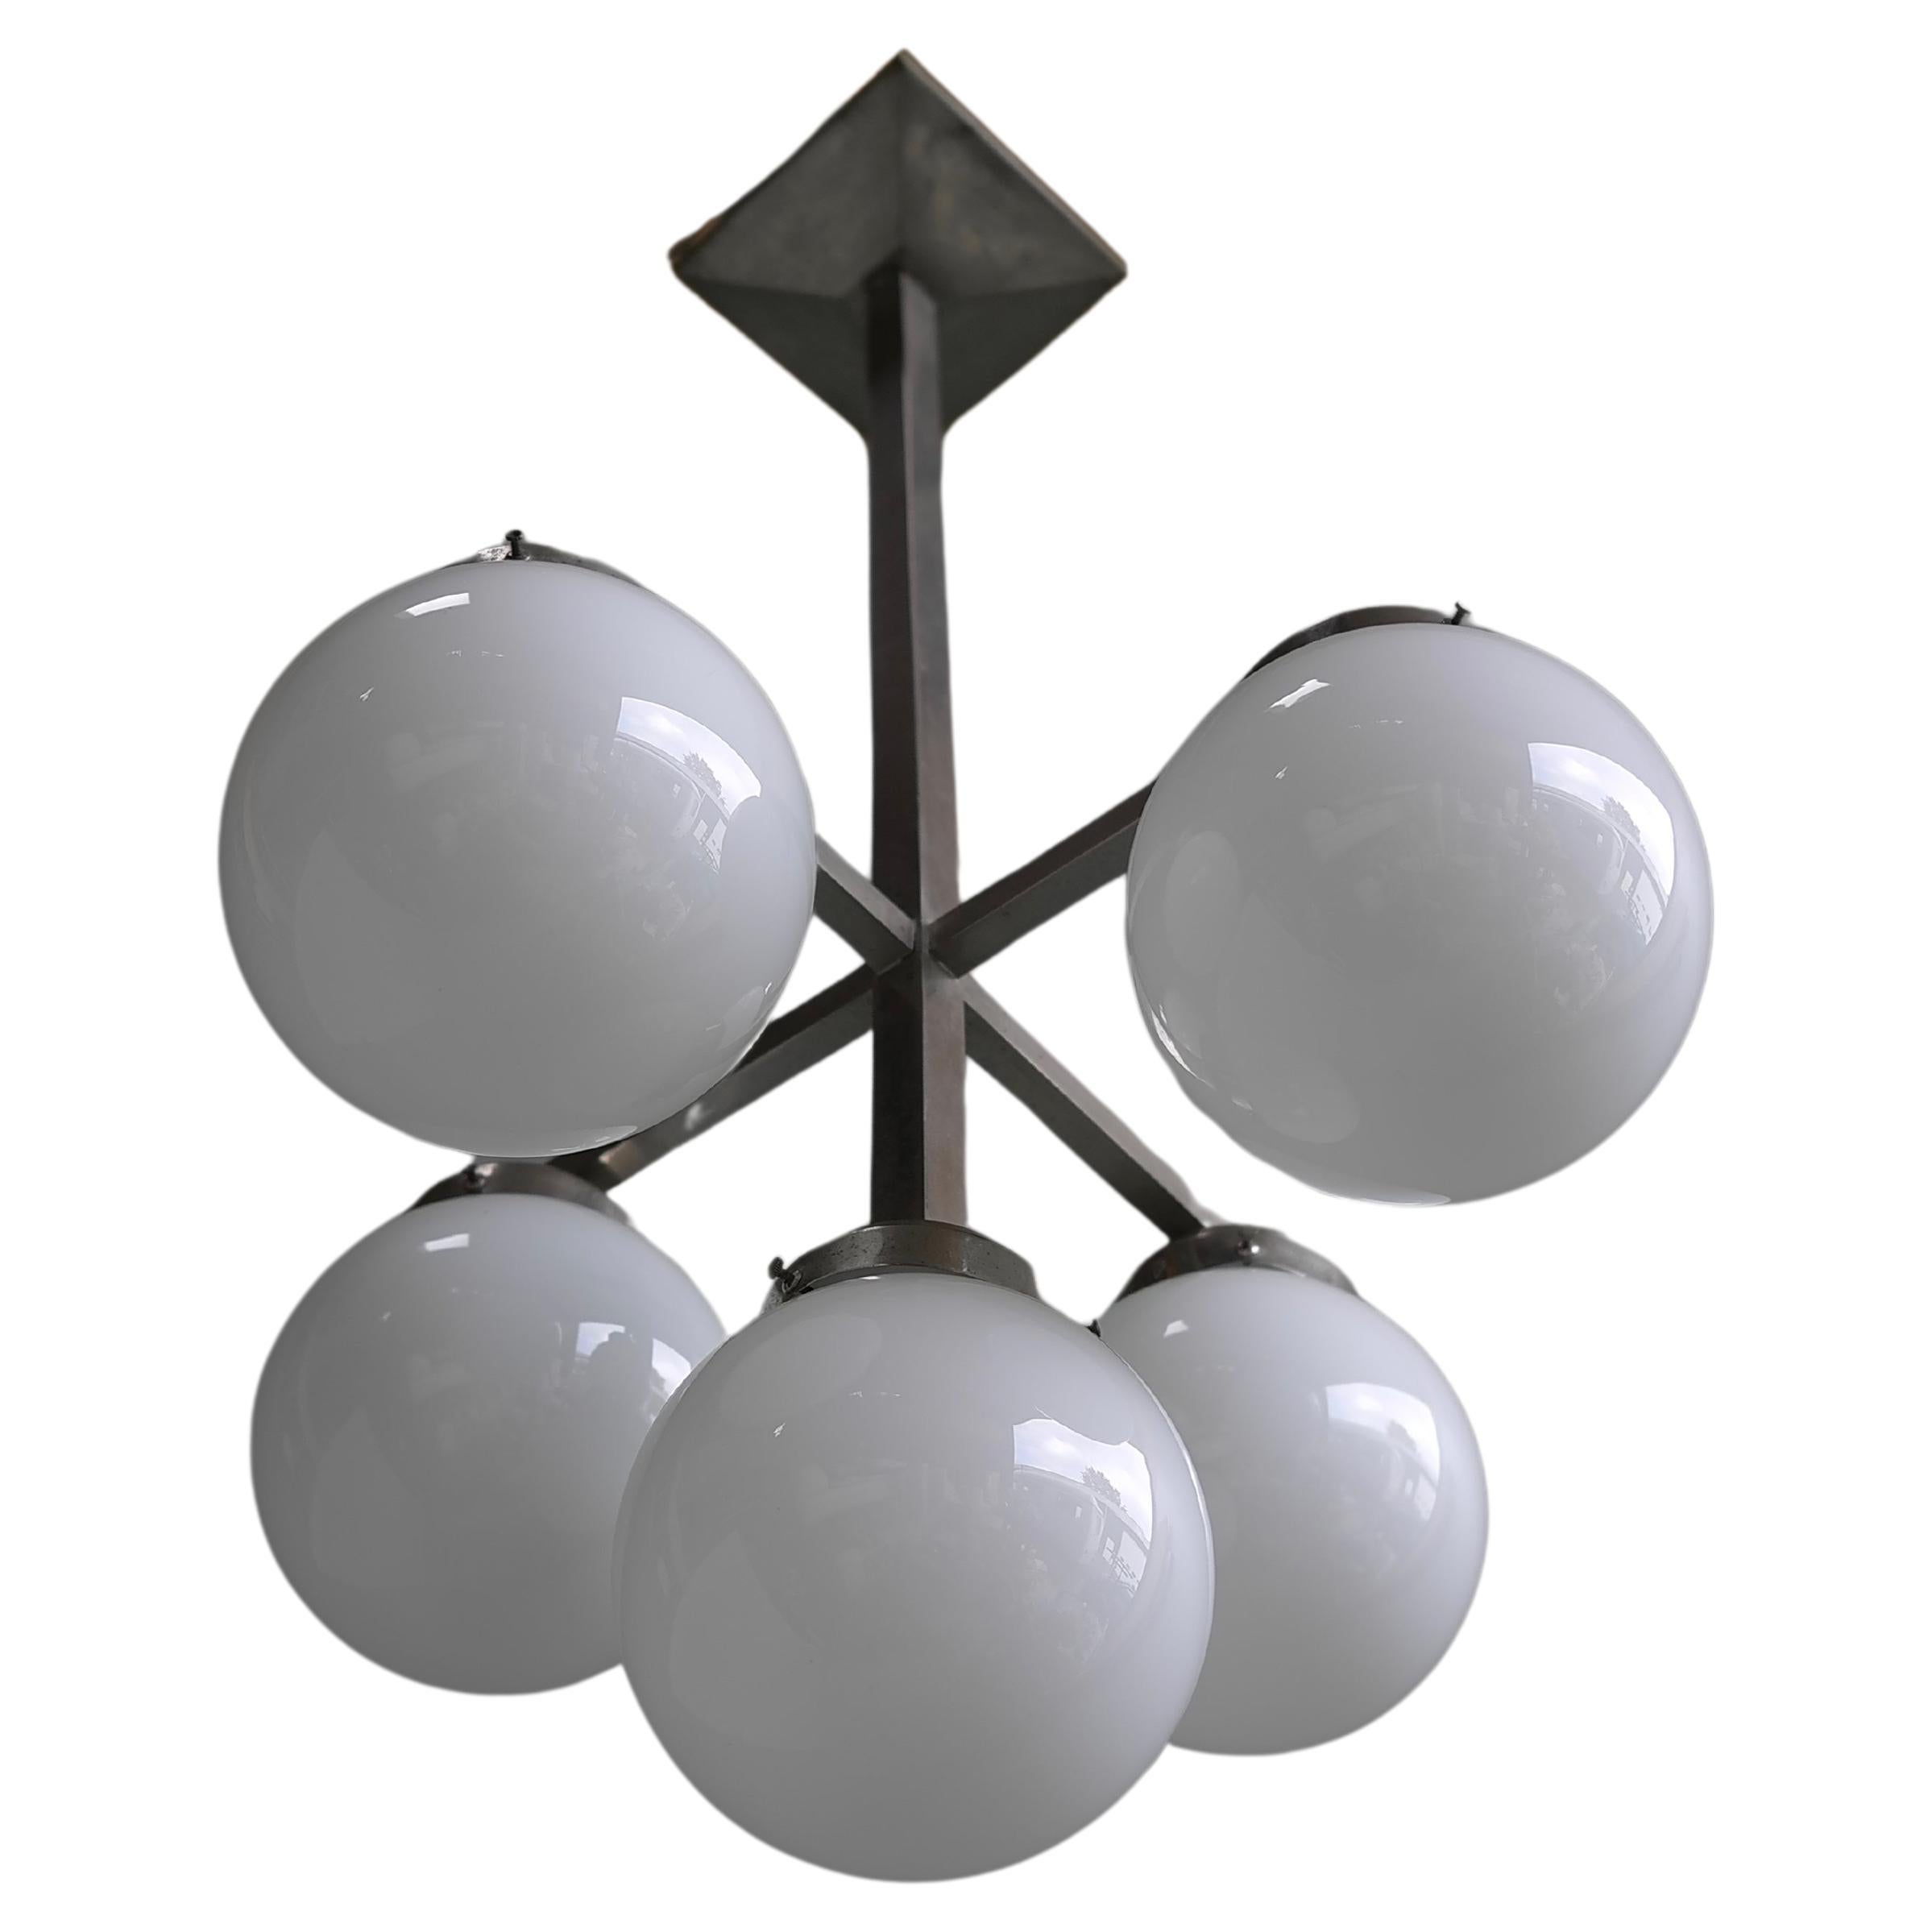 Monumental Art Deco Pendant in Metal with White Glass Balls, circa 1935

Would fit perfect in any hallway or other space.


